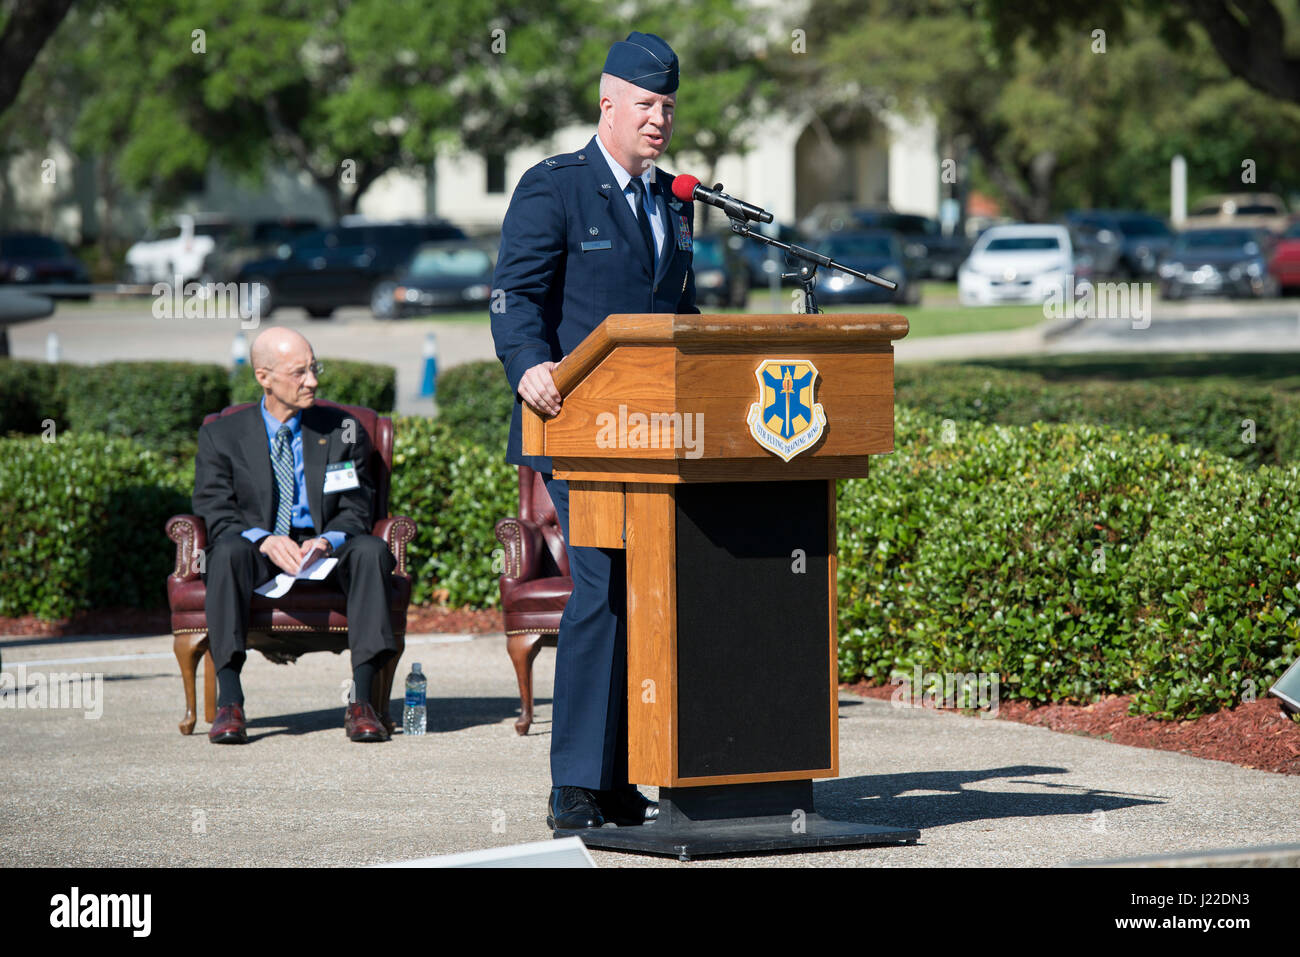 Col. Joel Carey, 12th Flying Training Wing commander, speaks during the Freedom Flyer Reunion wreath laying ceremony March 31, 2017, at Joint Base San Antonio-Randolph, Texas. The event honors all prisoners of war and missing in action service members from the Vietnam War and included a wreath-laying ceremony and a missing man formation flyover.  (U.S. Air Force photo by Sean M. Worrell) Stock Photo